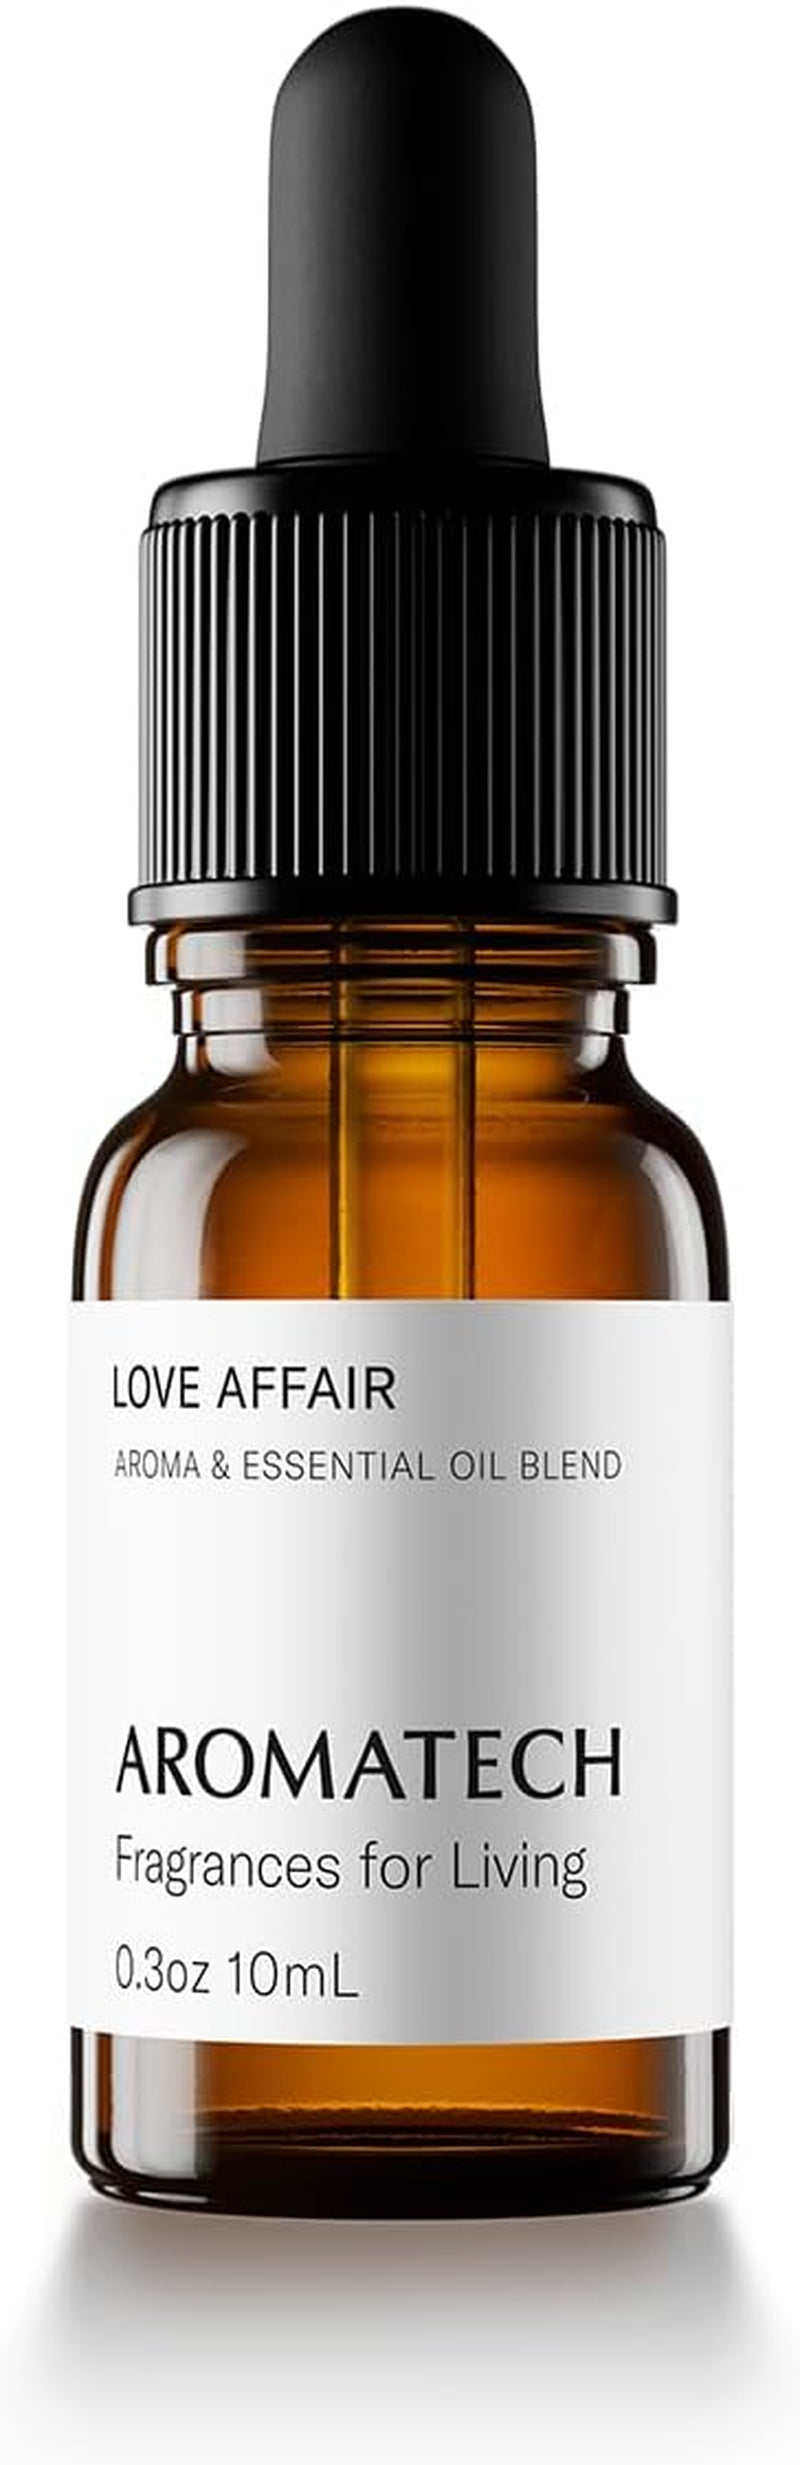 Love Affair Aroma Essential Oil Blend Stocking Stuffers, Aromatherapy Diffuser Oil, Holiday Gifts with Jasmine, Saffron & Cedarwood for Diffuser, Humidifier - 0.3 Fl Oz, 10 Ml